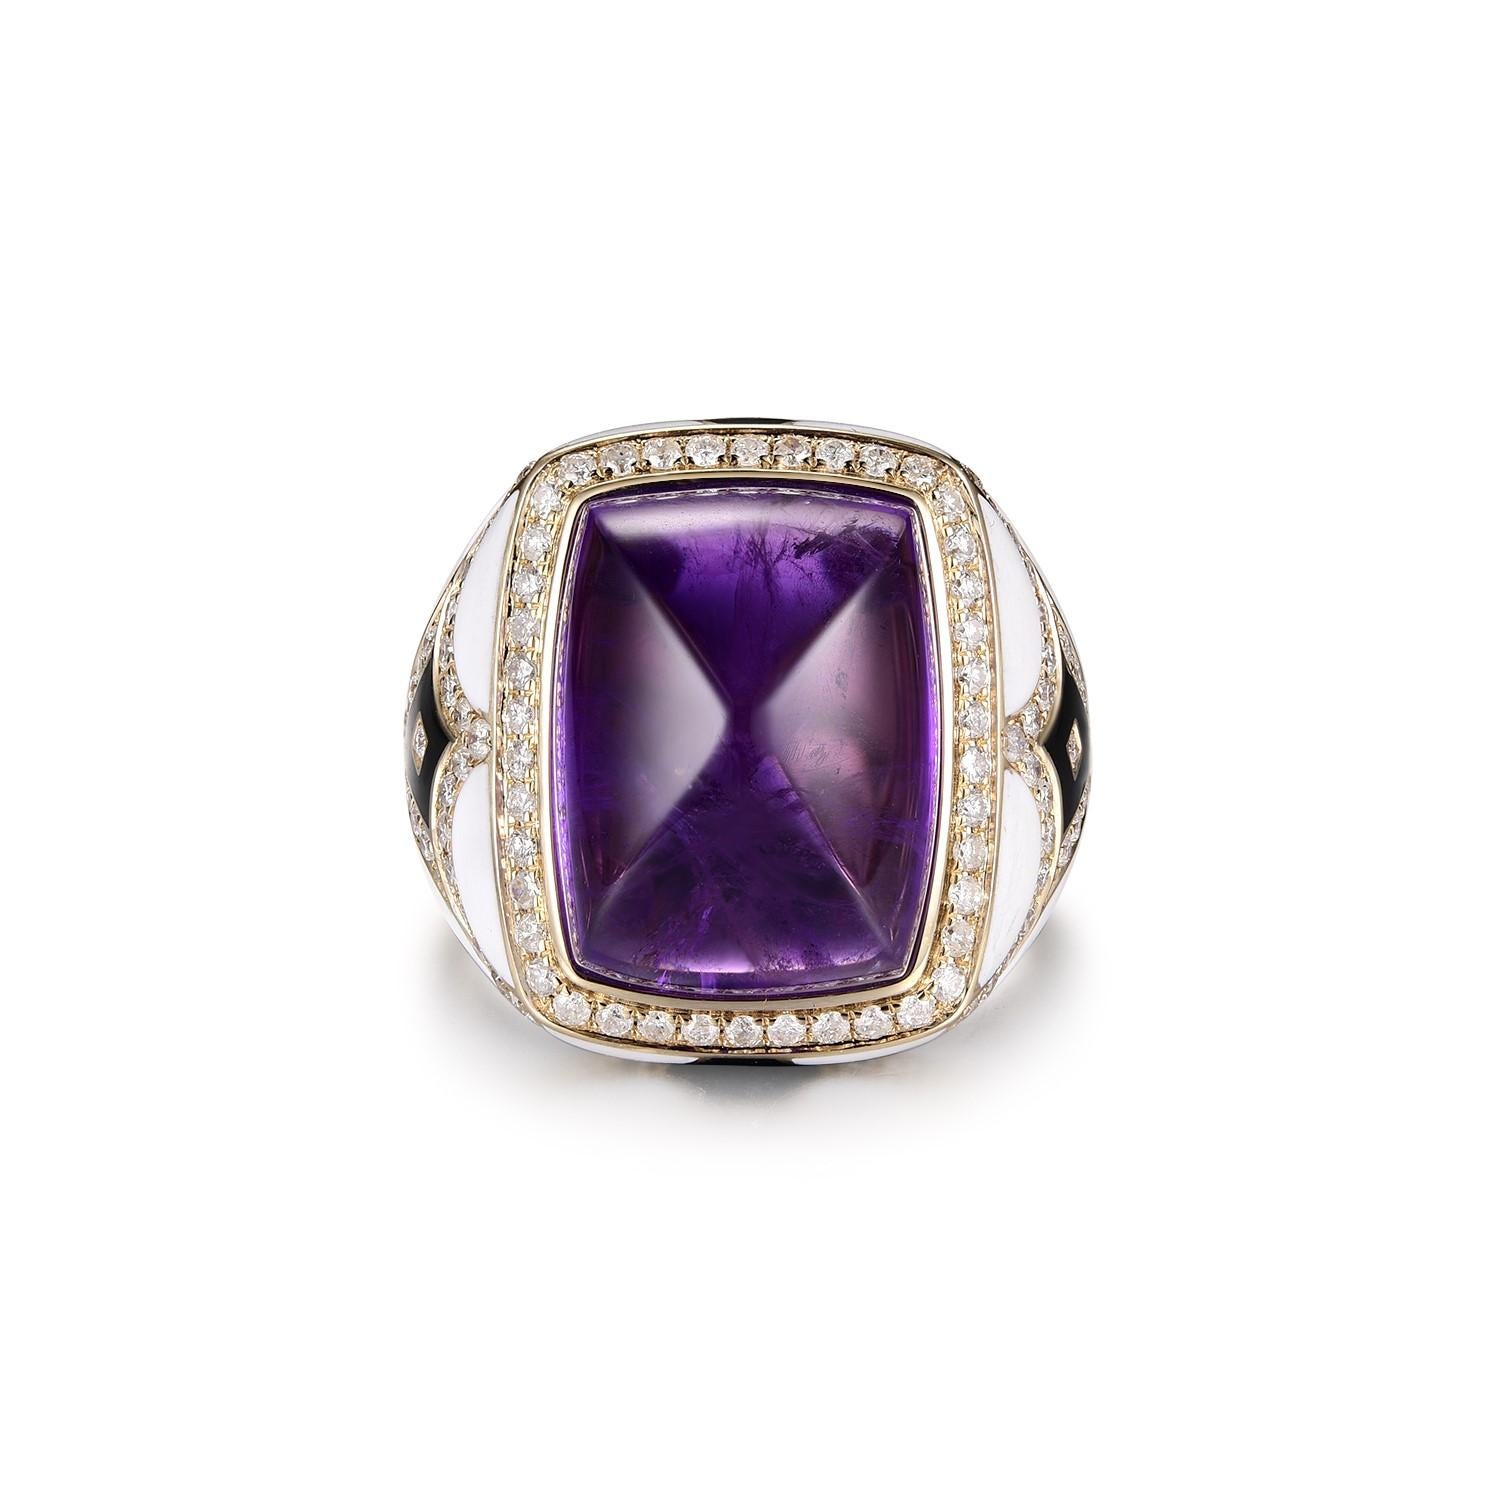 This cocktail ring feature a 15.10 carat sugarloaf amethyst, assented with 0.83 carat of diamonds on the halo and the shoulder of the ring. The body of the ring is applied with black and white enamel. An eye catching piece for any occasion. Ring is